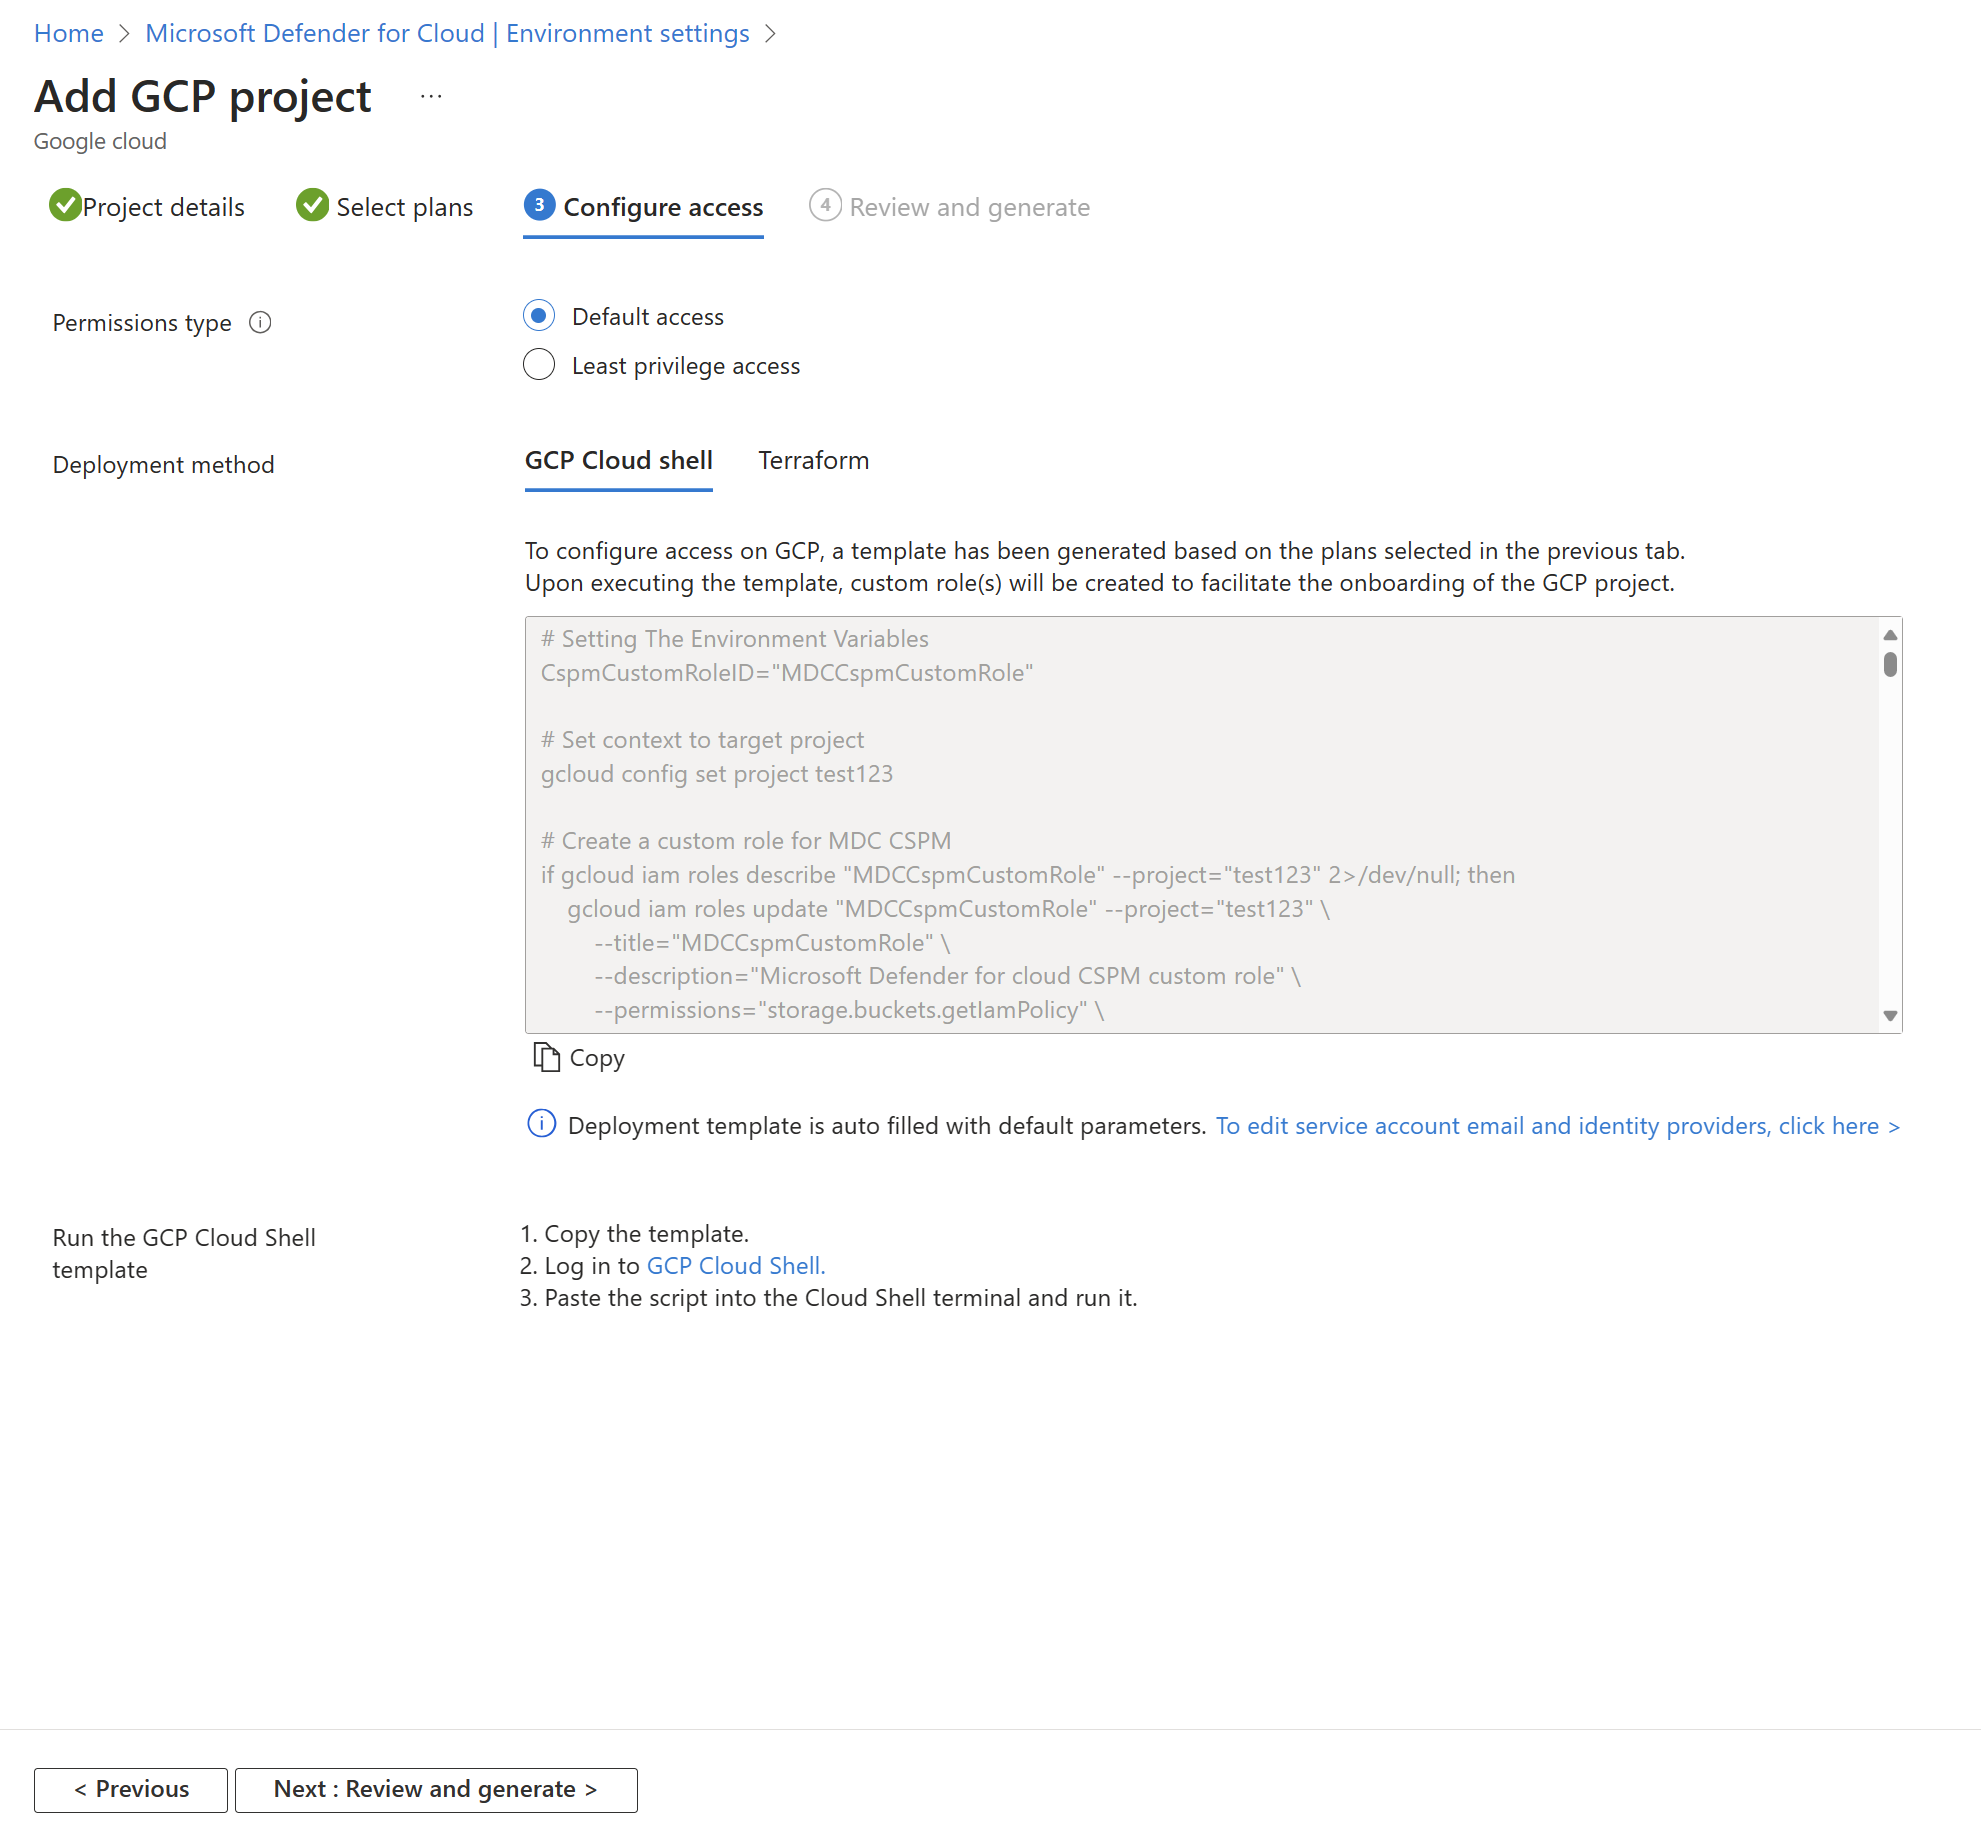 Screenshot of how to configure access for a GCP environment in Microsoft Defender for Cloud.